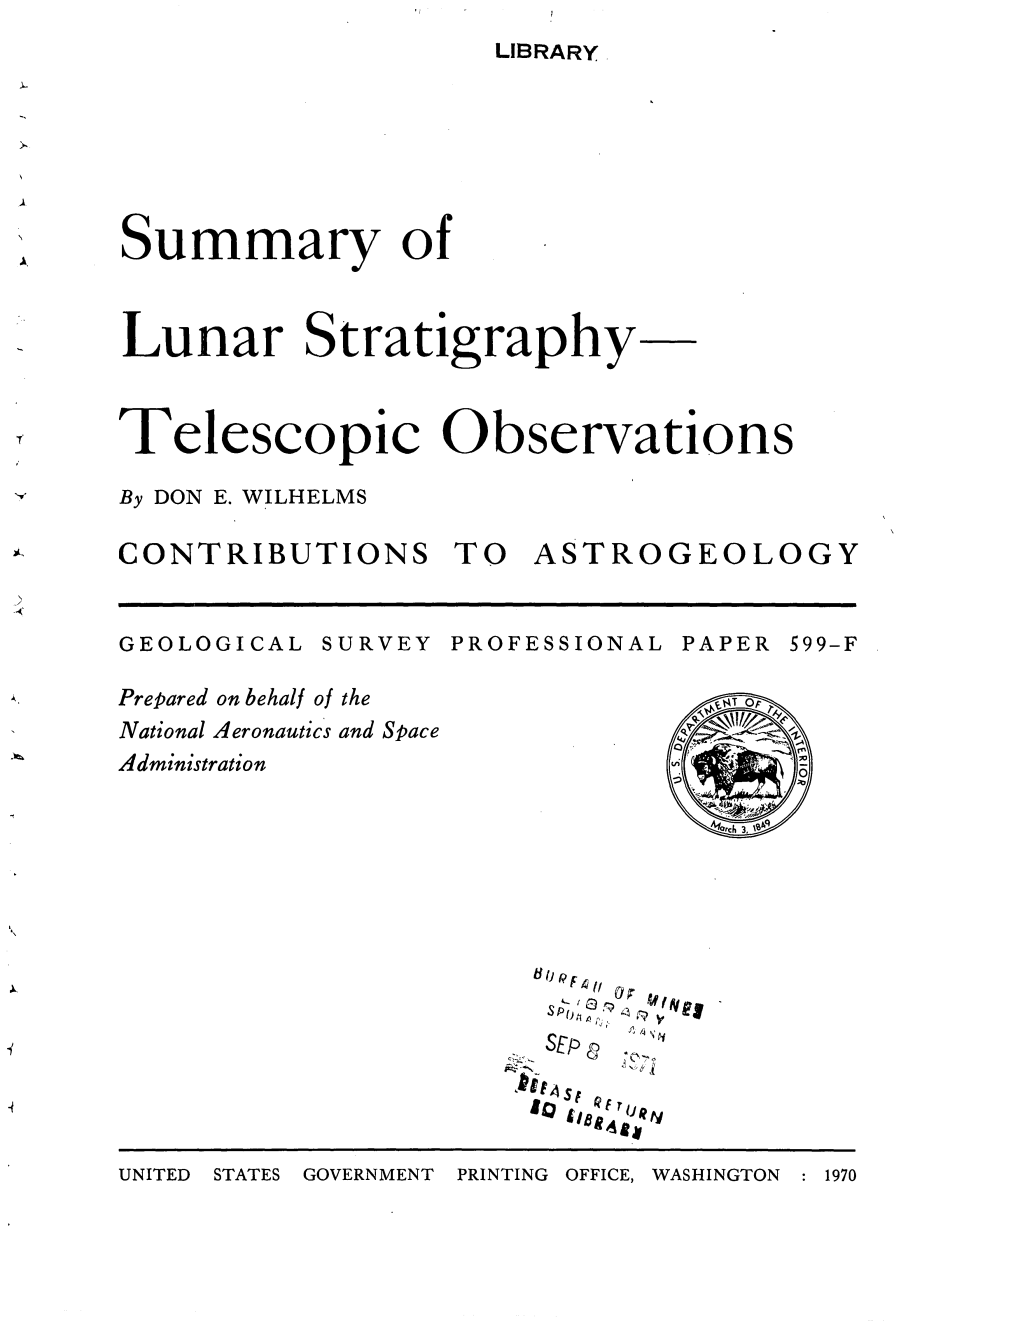 Summary of Lunar Stratigraphy- Telescopic Observations